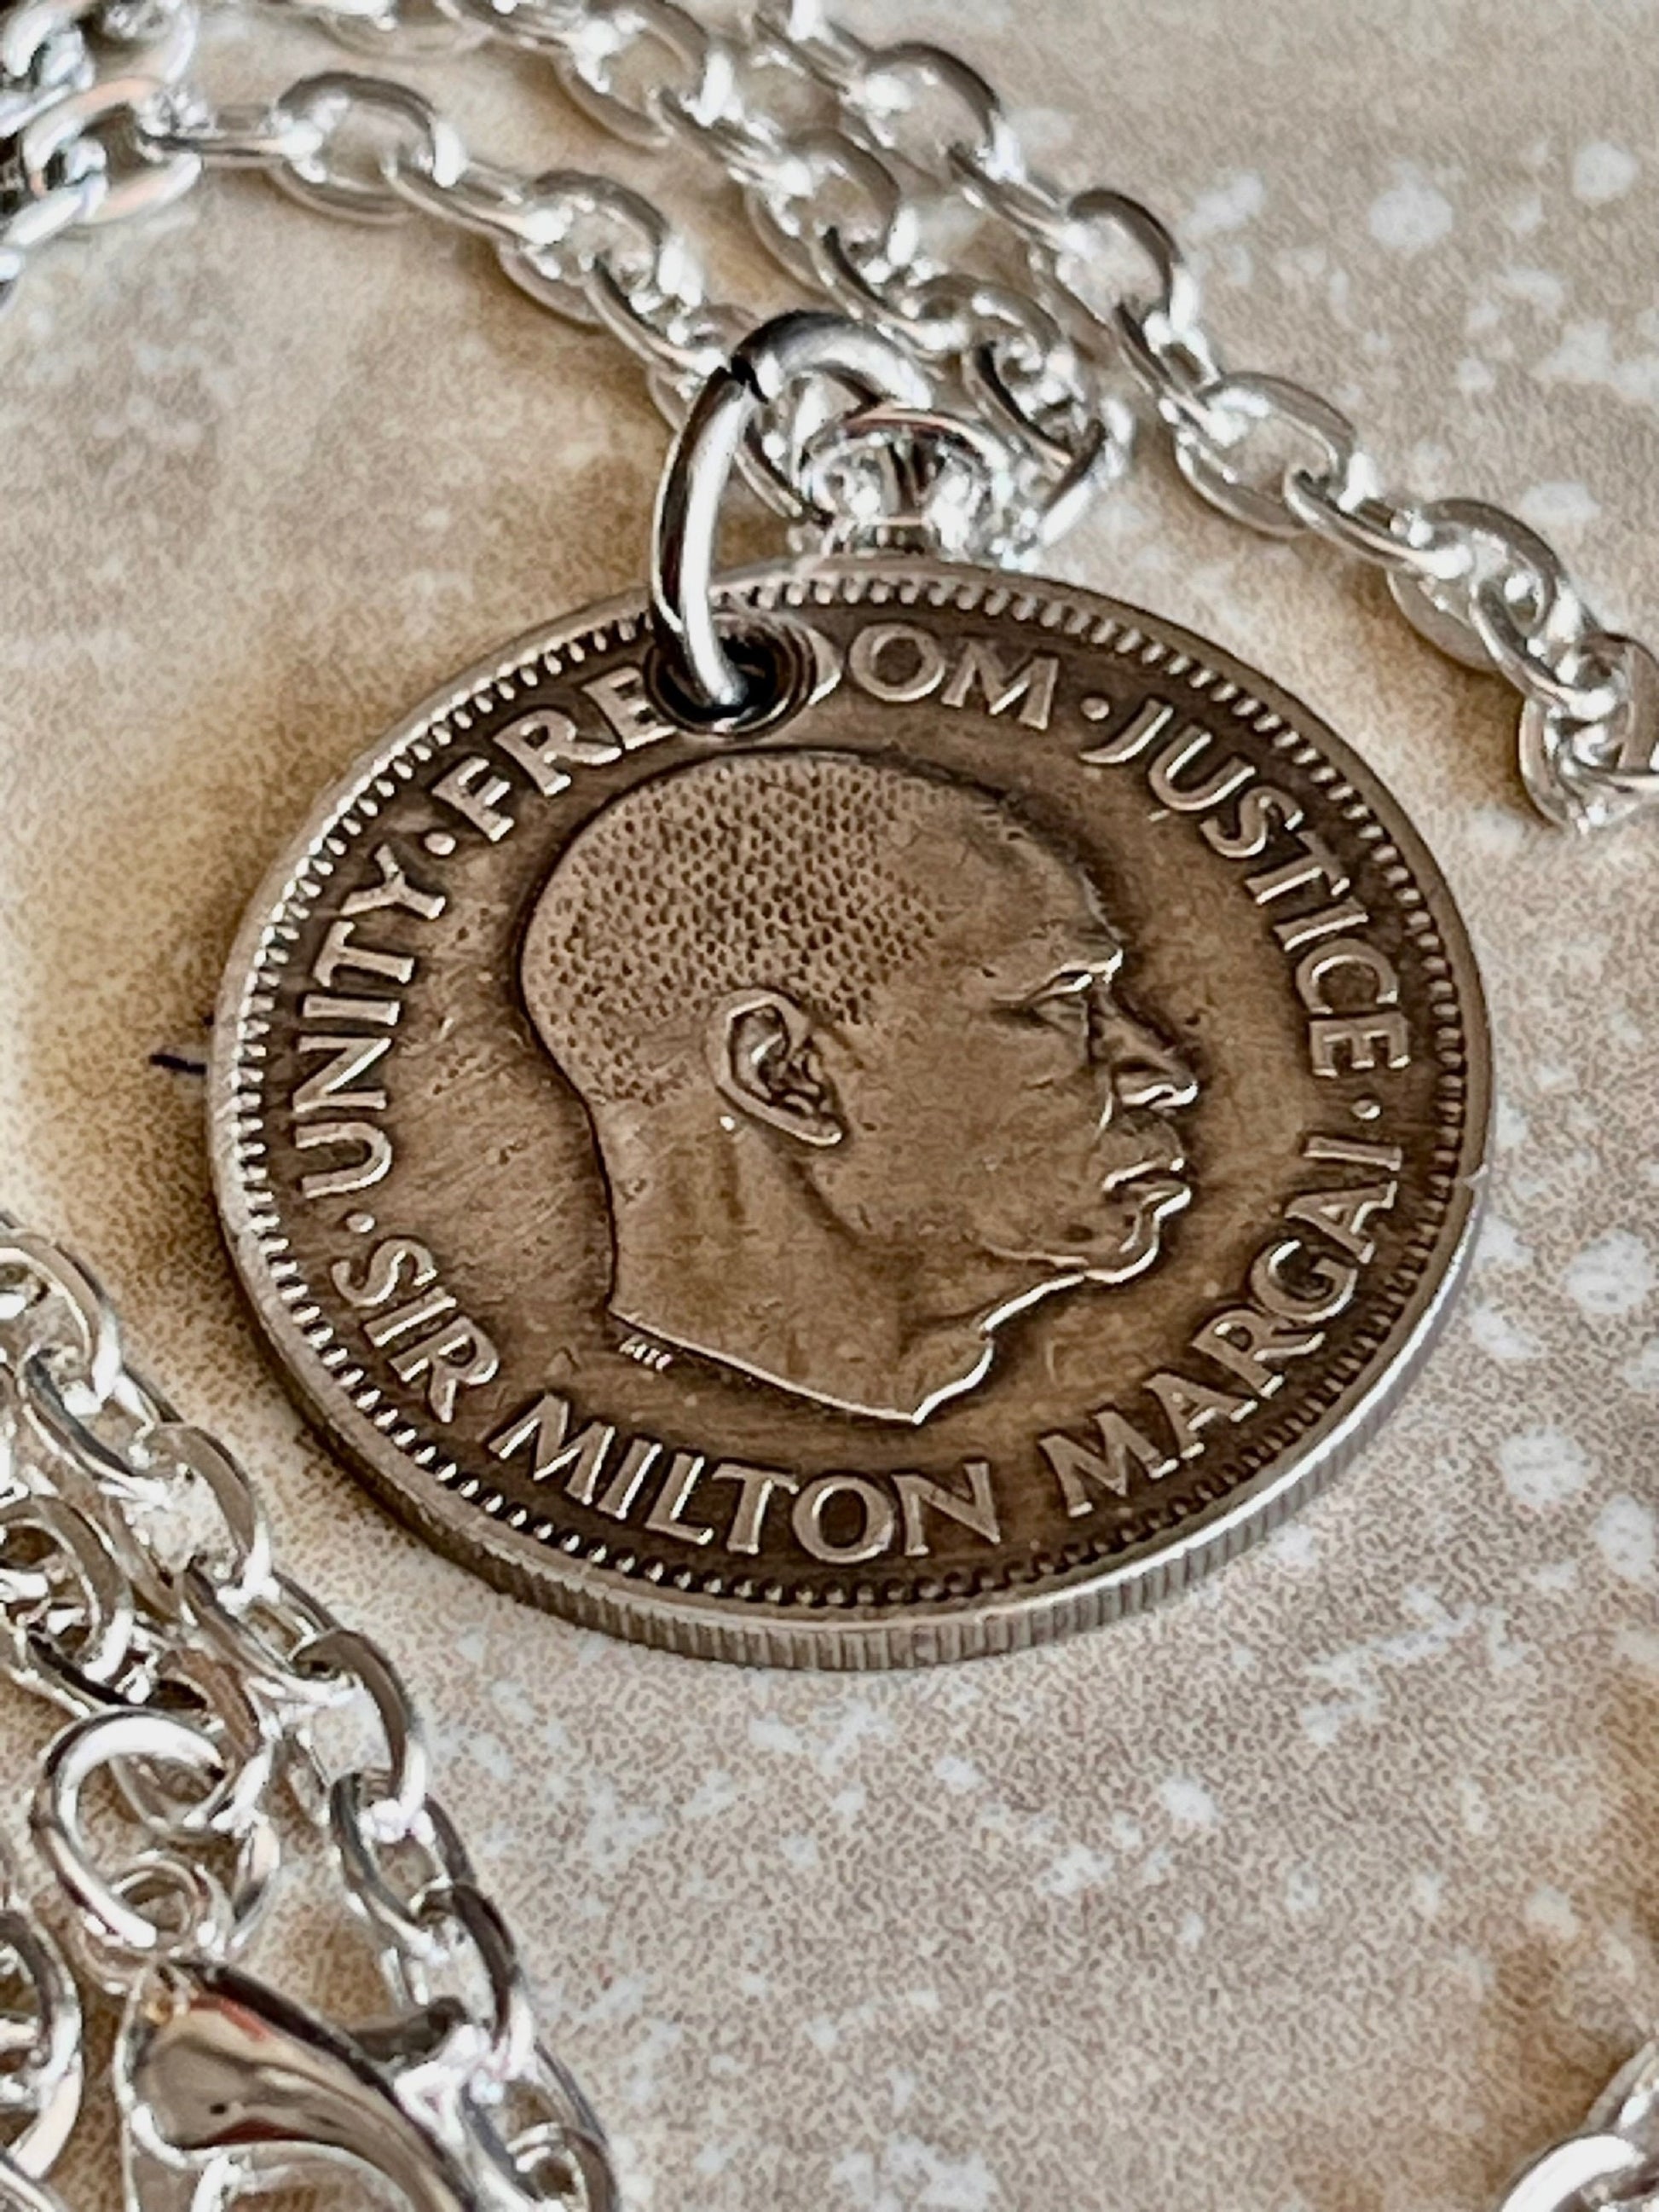 Sierra Leone Coin Pendant African 10 Cents Personal Necklace Vintage Handmade Jewelry Gift Friend Charm For Him Her World Coin Collector